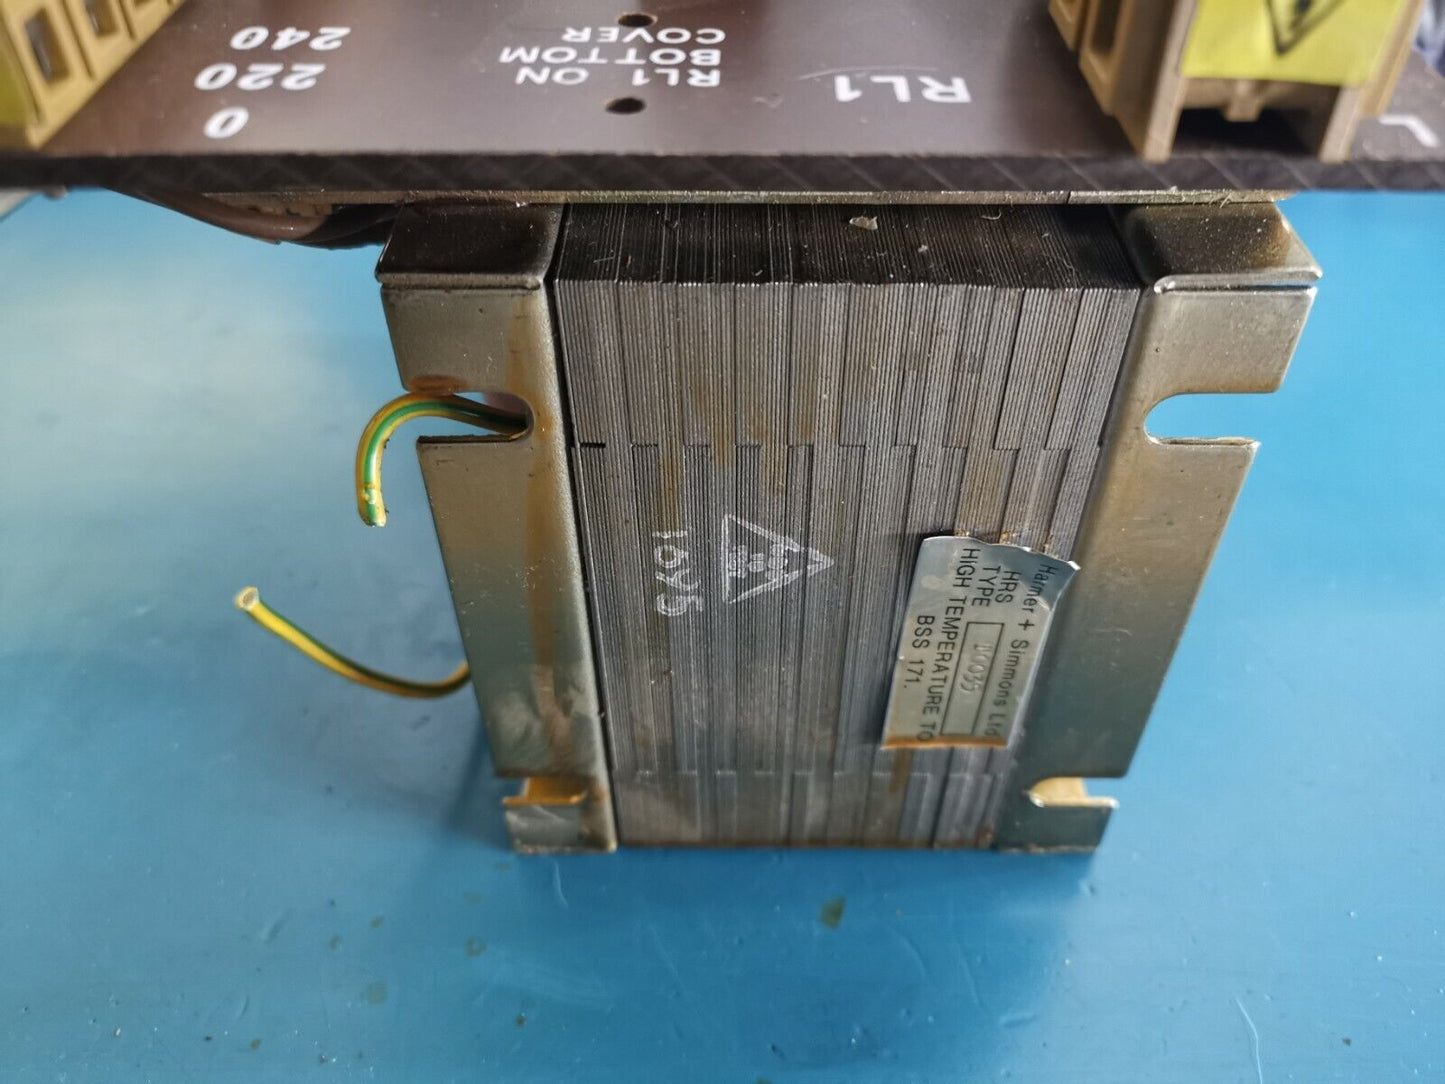 28v 6A DC Rating AC Mains Transformer From Military Power Supply